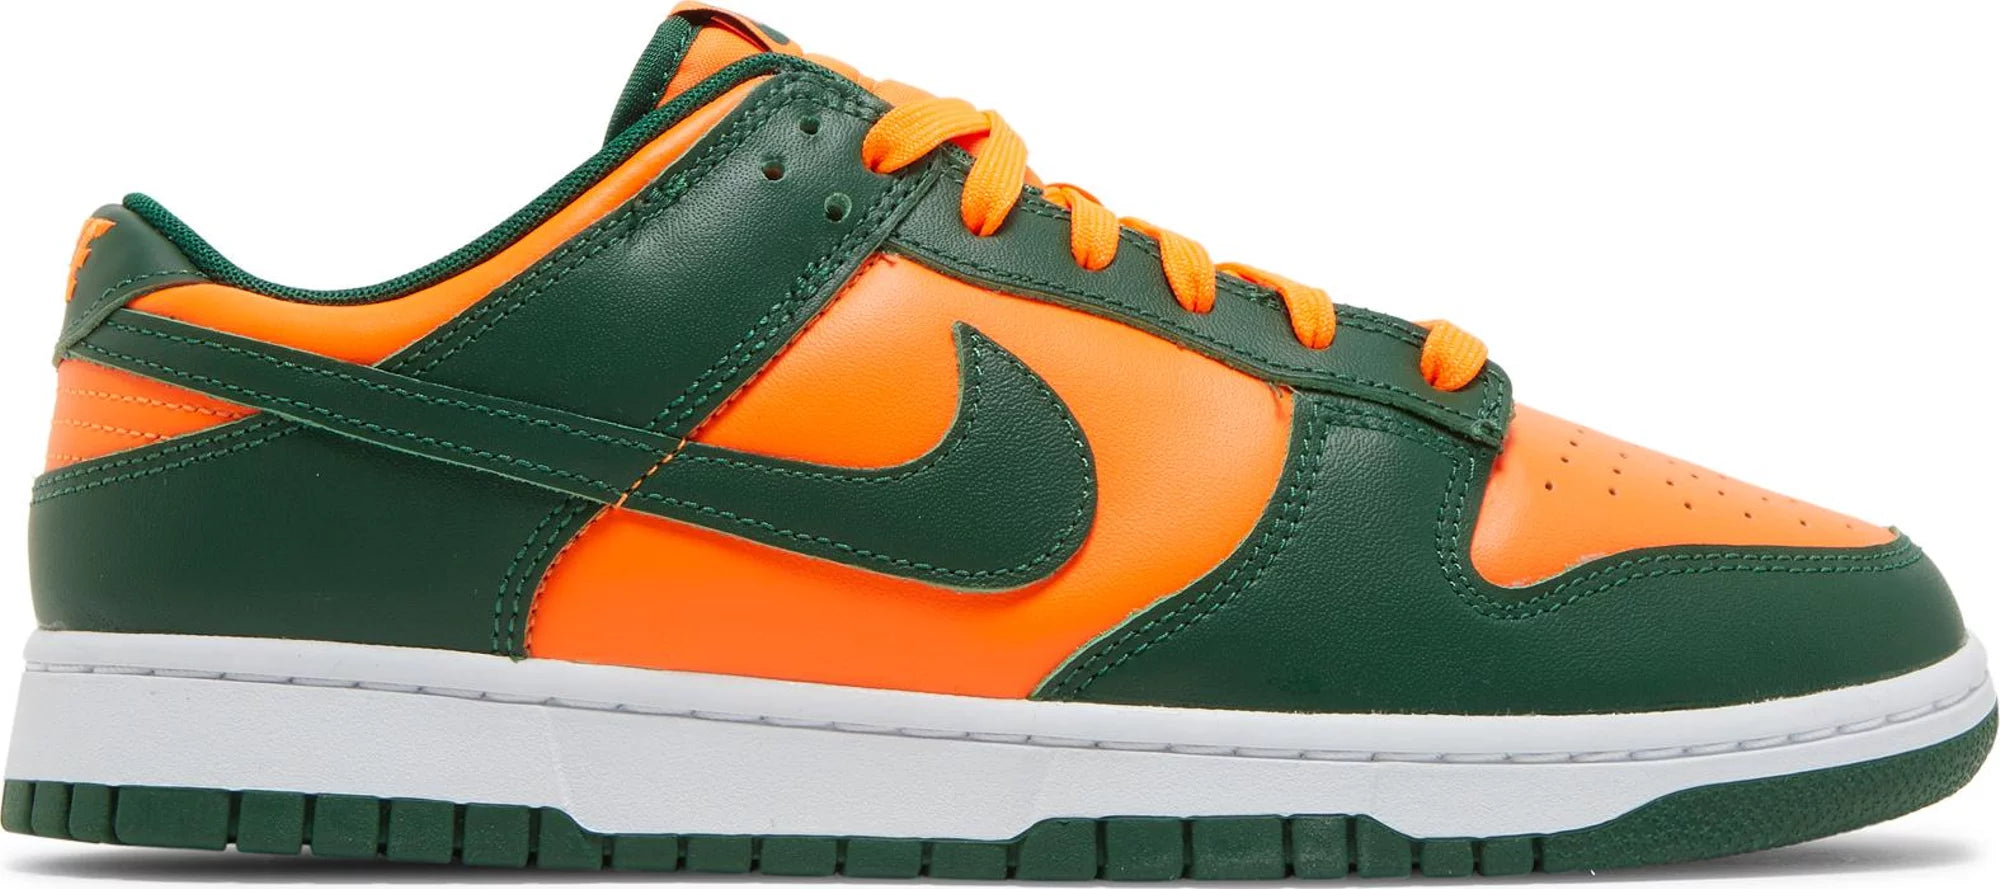 Don't buy the Nike dunk low Miami Hurricane until you watch this